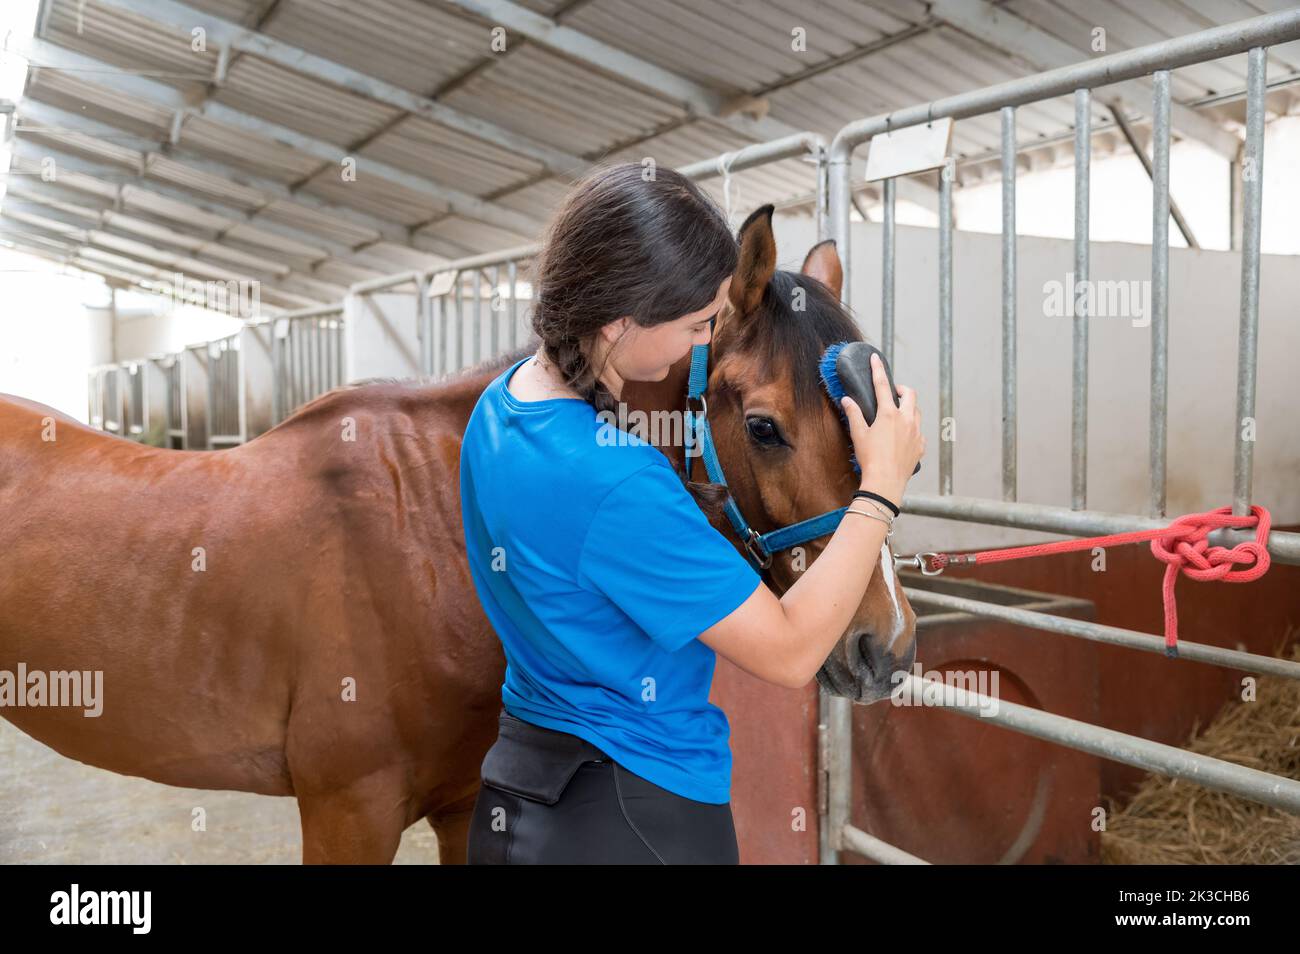 Young female with dark hair brushing mane of bay horse tied to bars of stall in barn on ranch Stock Photo